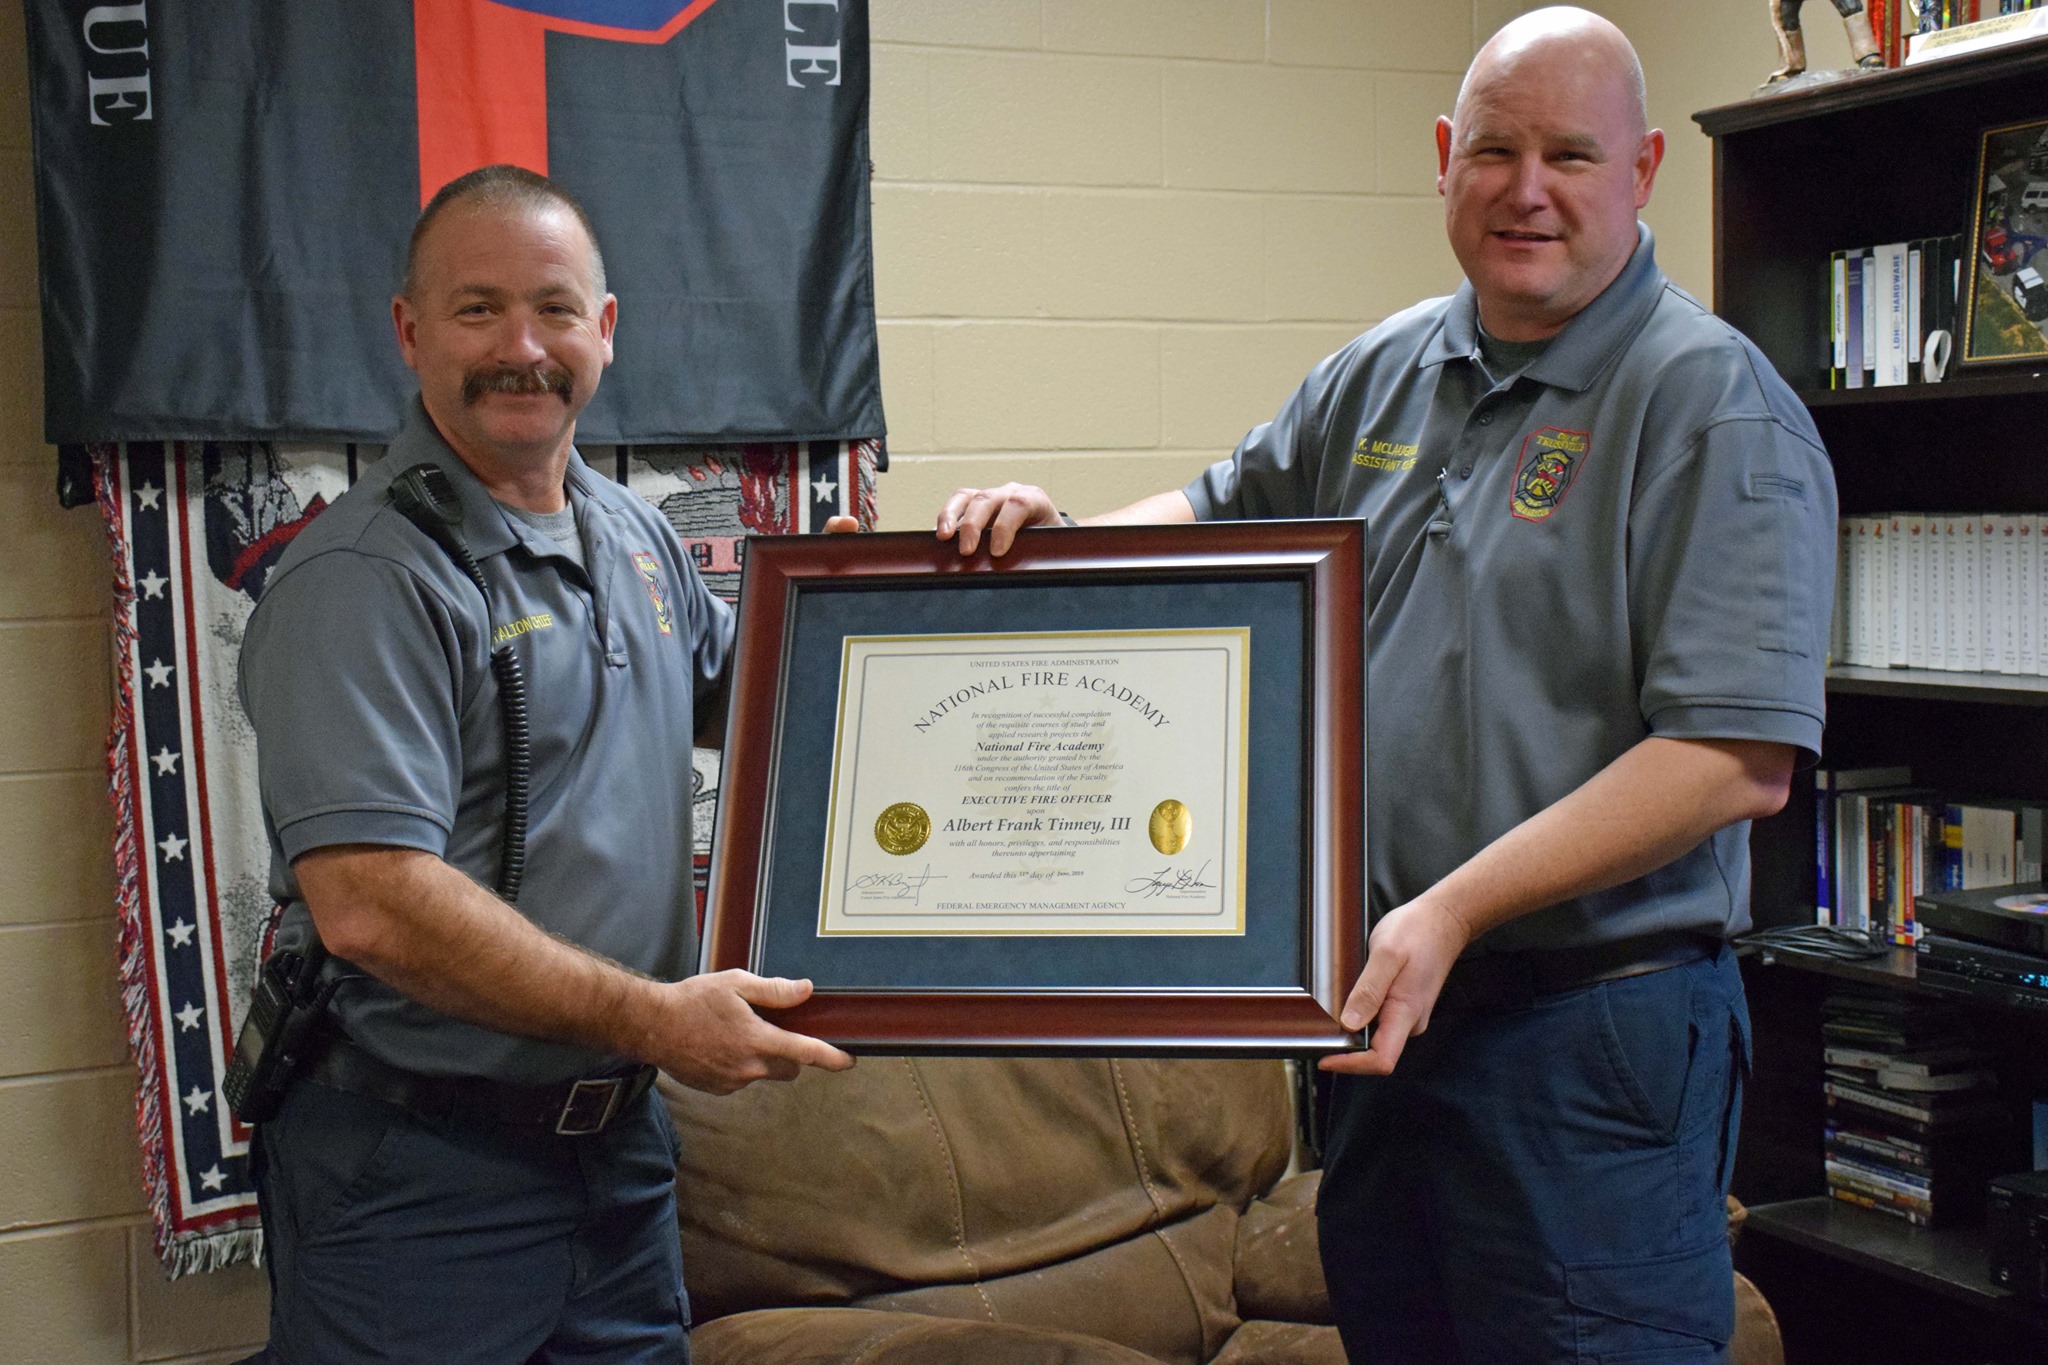 Trussville Fire and Rescue Battalion Chief joins national rank of Executive Fire Officers